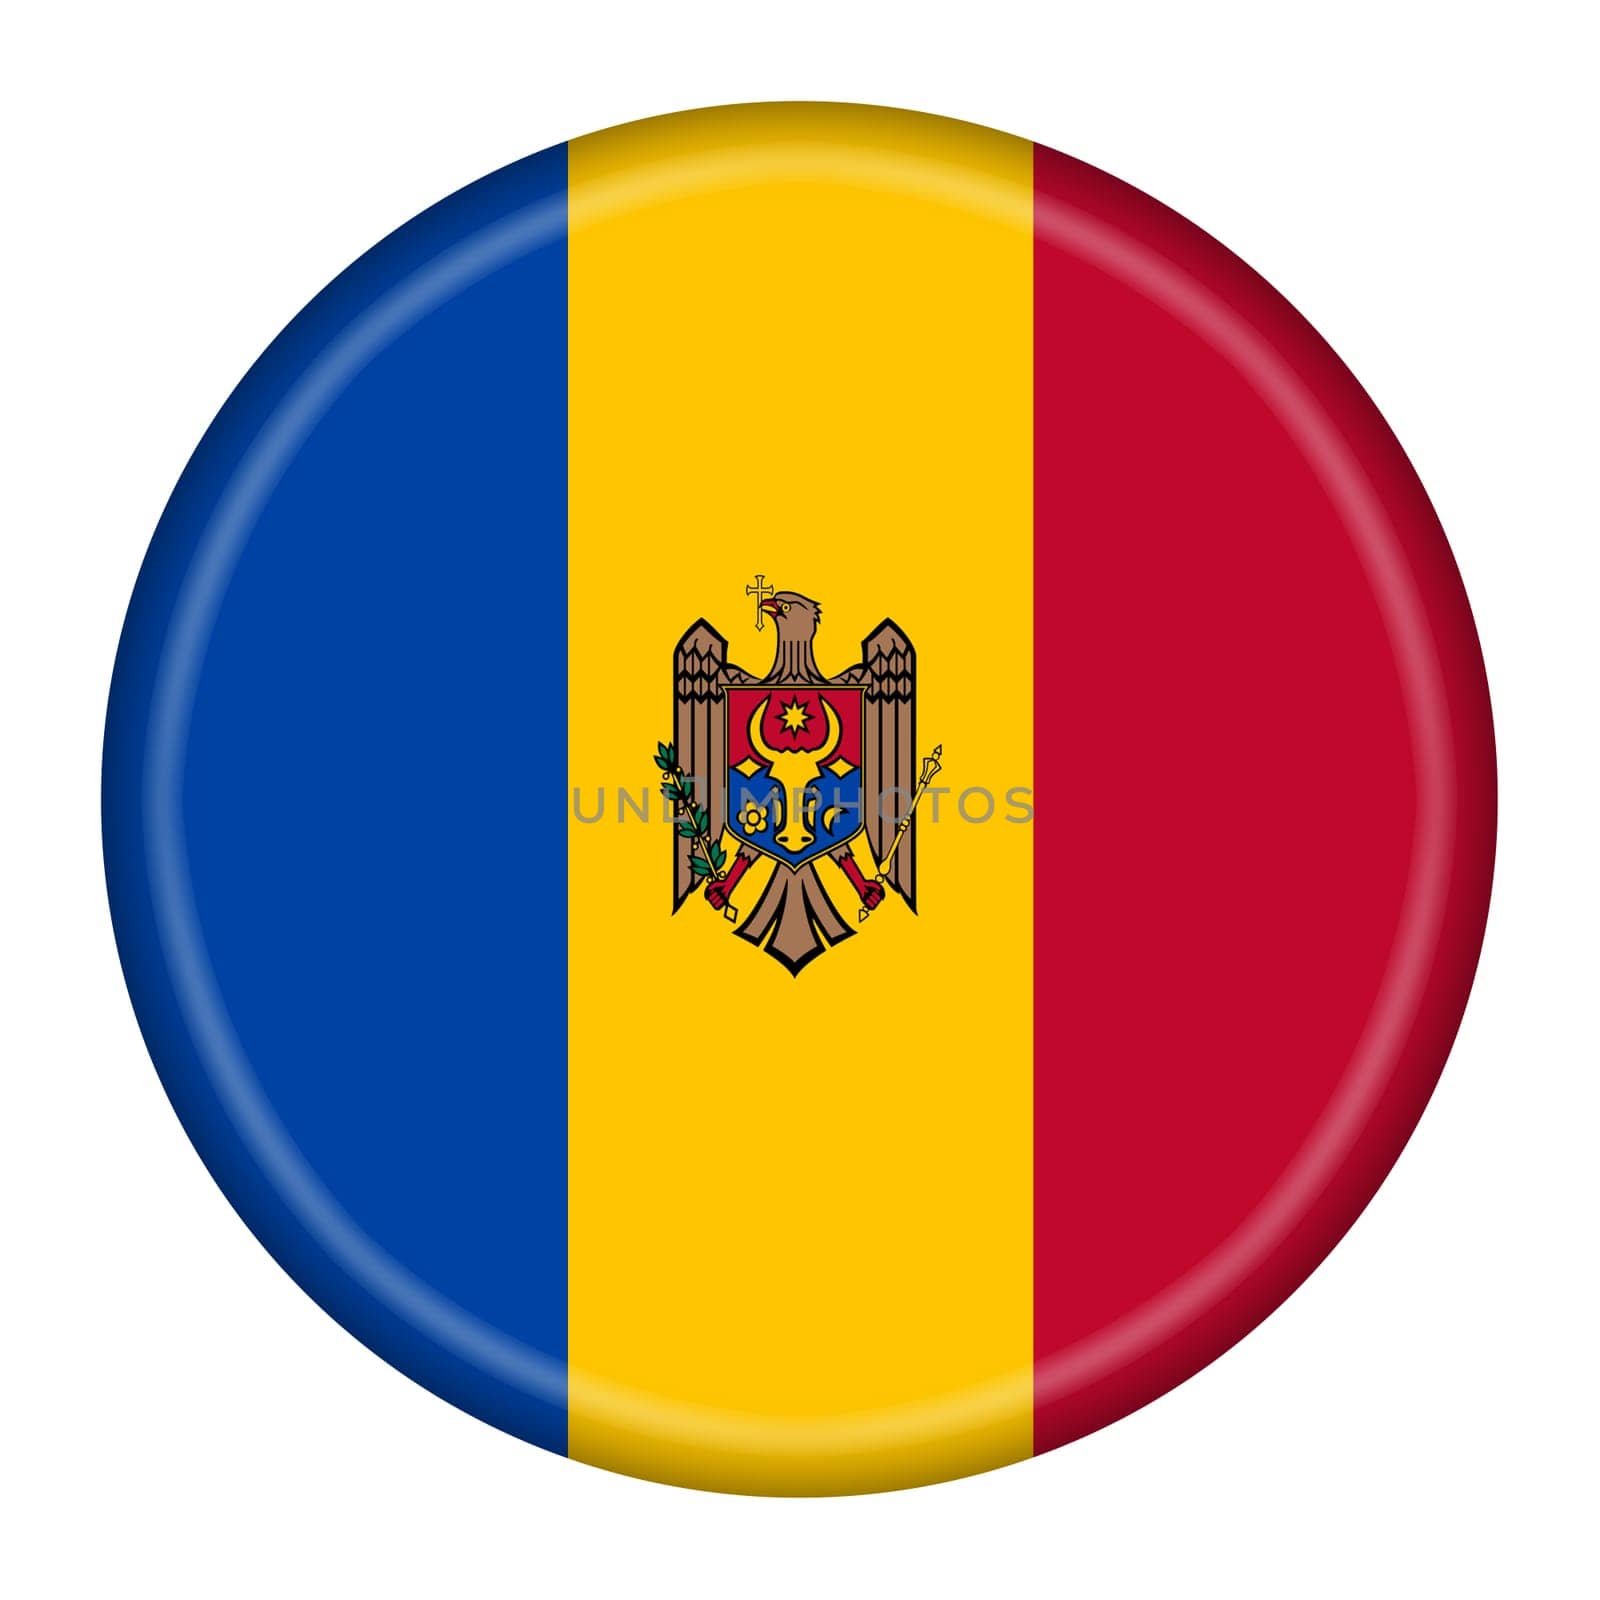 A Moldova flag button 3d illustration with clipping path